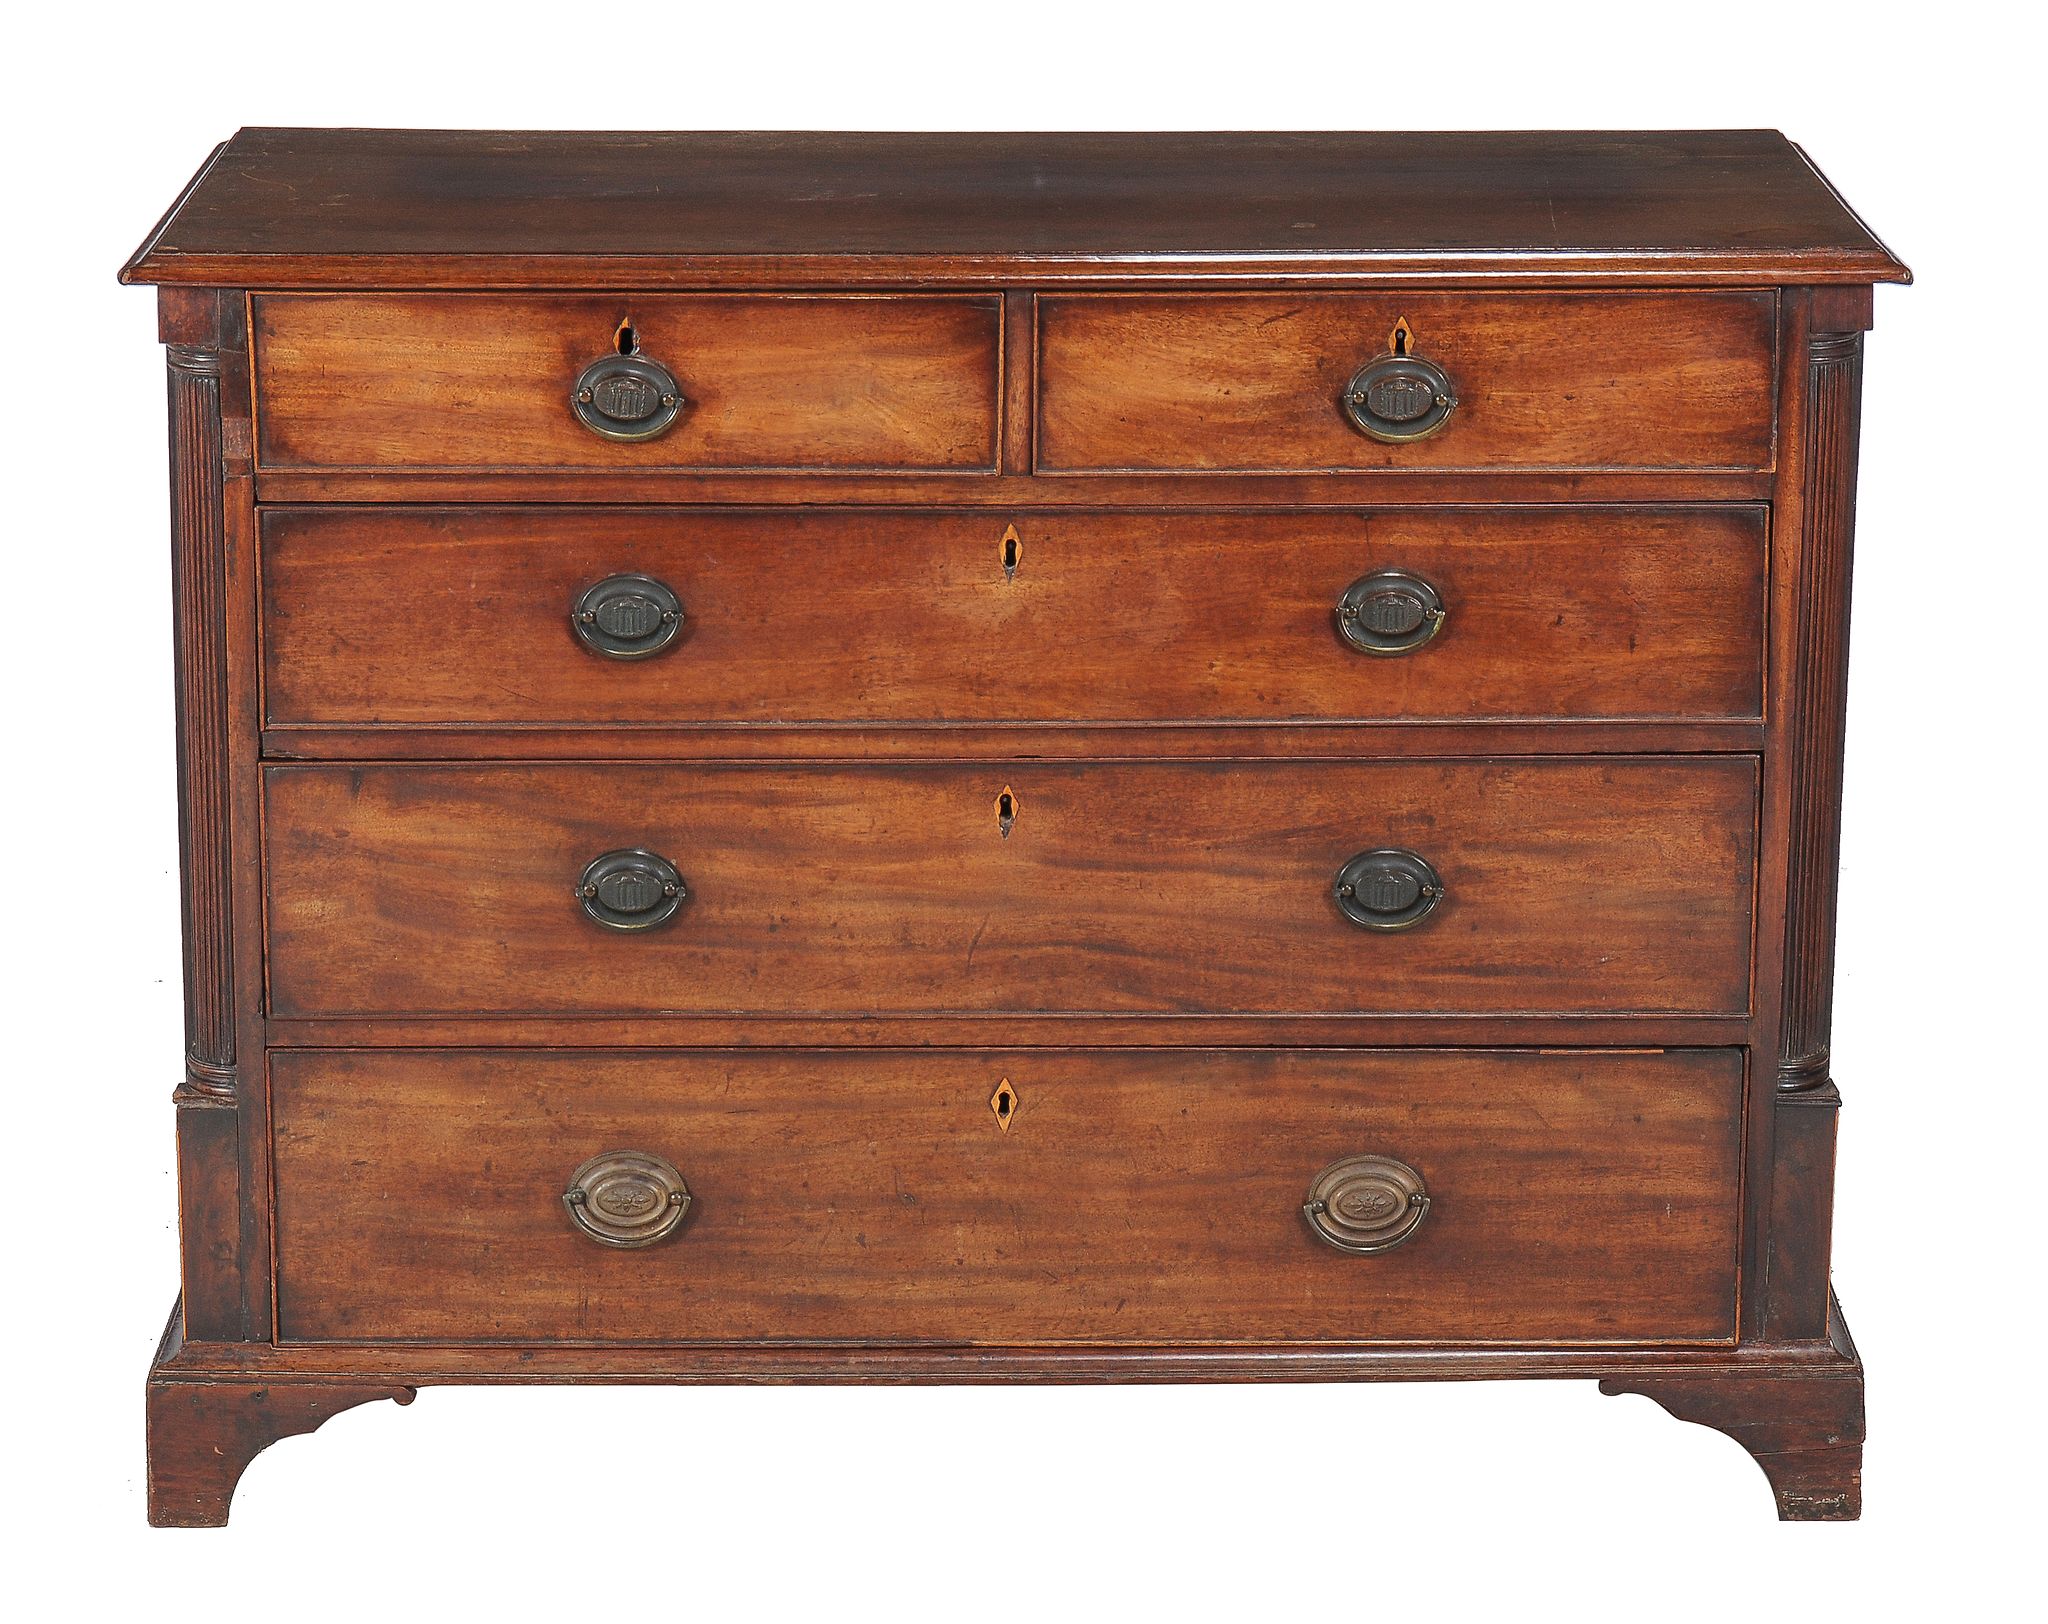 A George III mahogany chest of drawers, circa 1770, the arrangement of drawers flanked by quarter